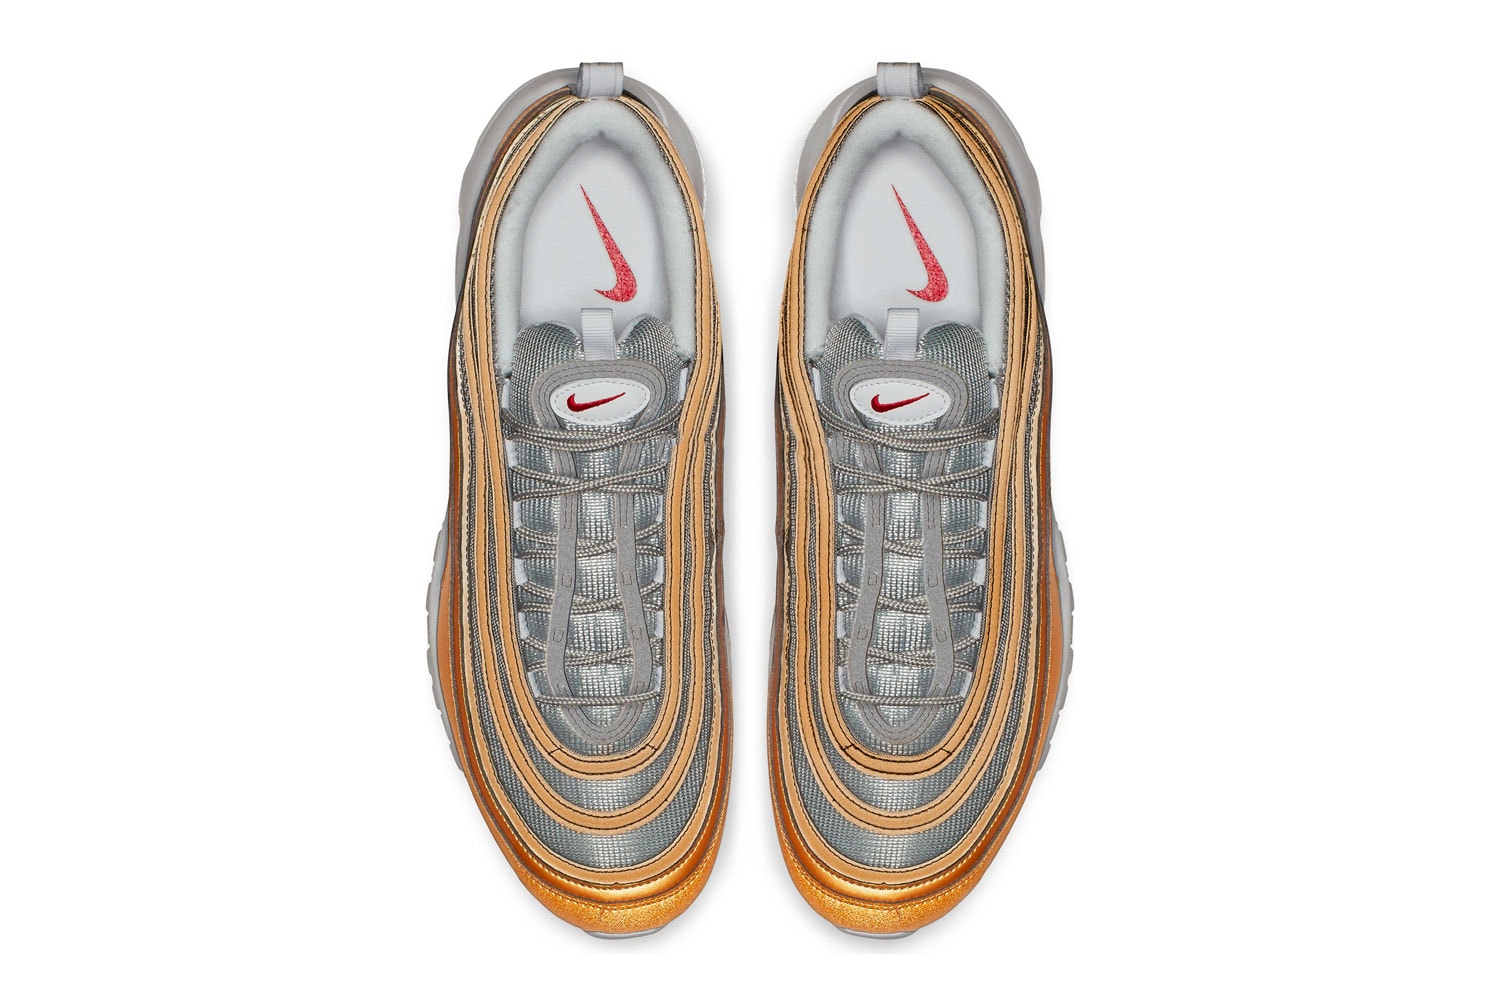 Nike Air Max 97 Metallic Gold/University Red Release info Date price stockist 